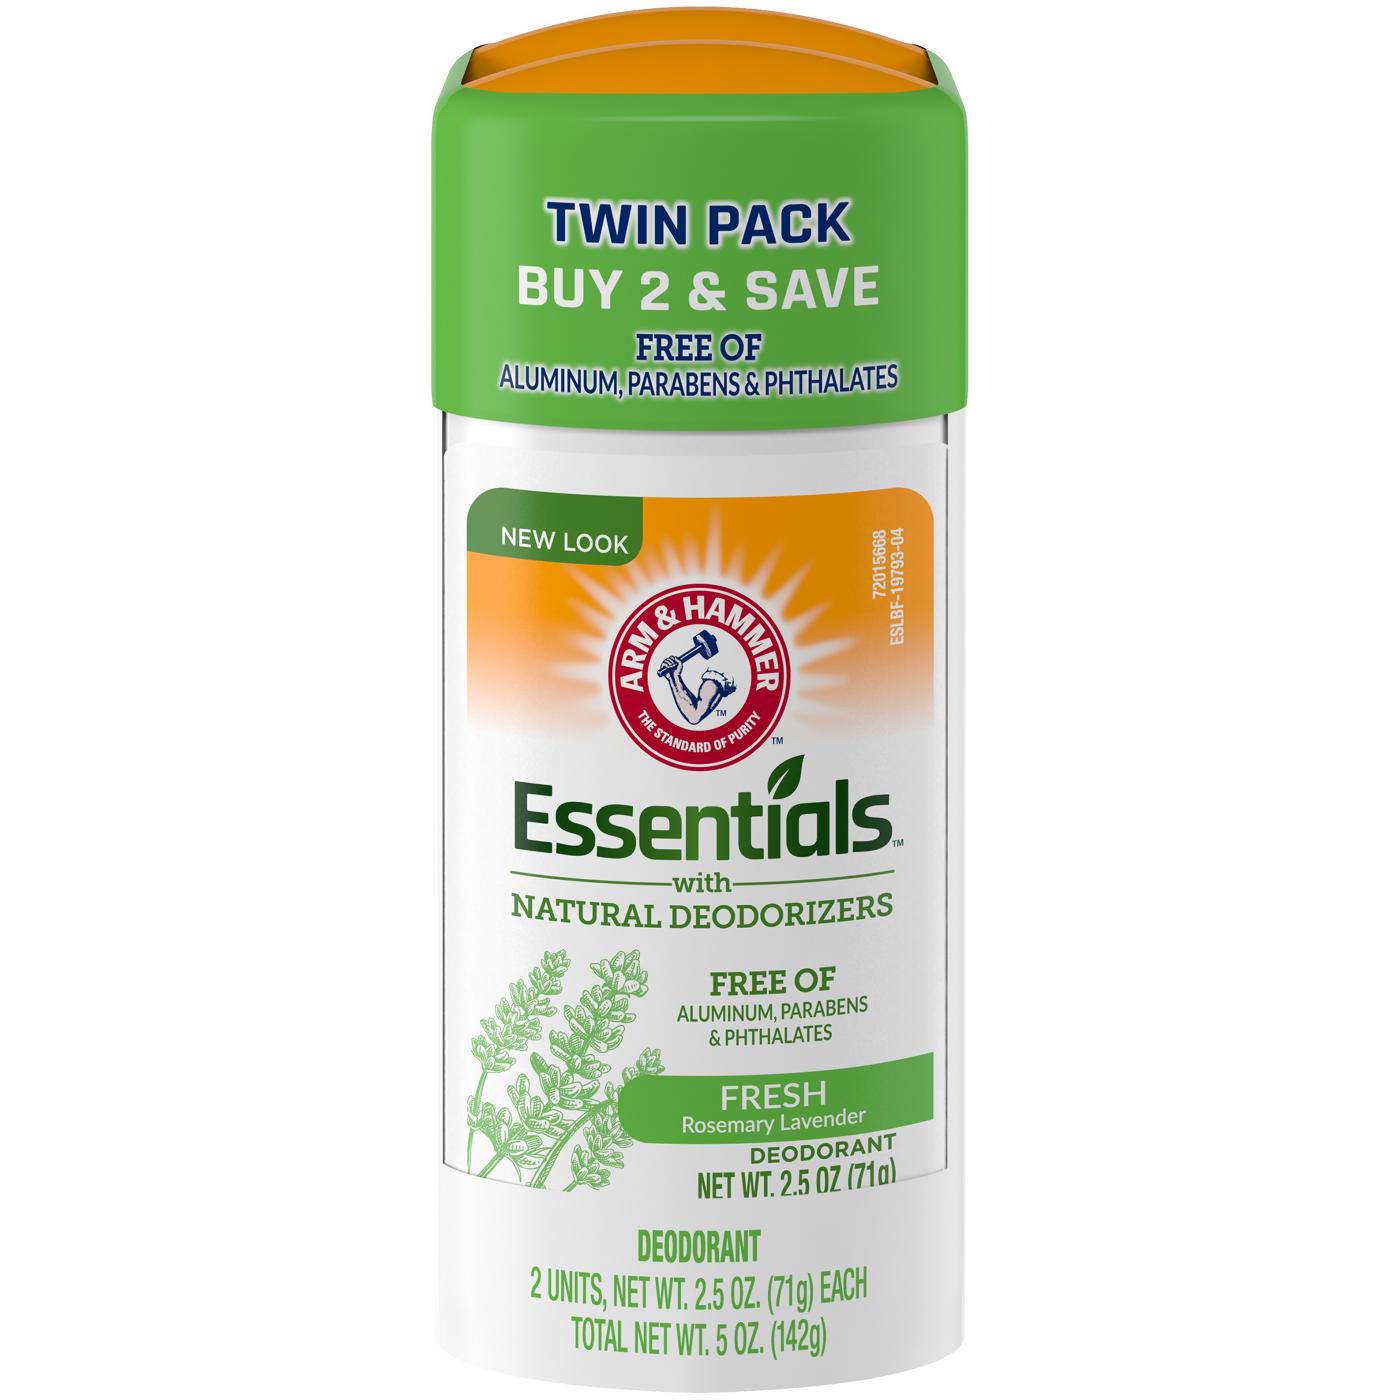 Arm & Hammer Essentials Deodorant Rosemary Lavender Twin Pack; image 1 of 4